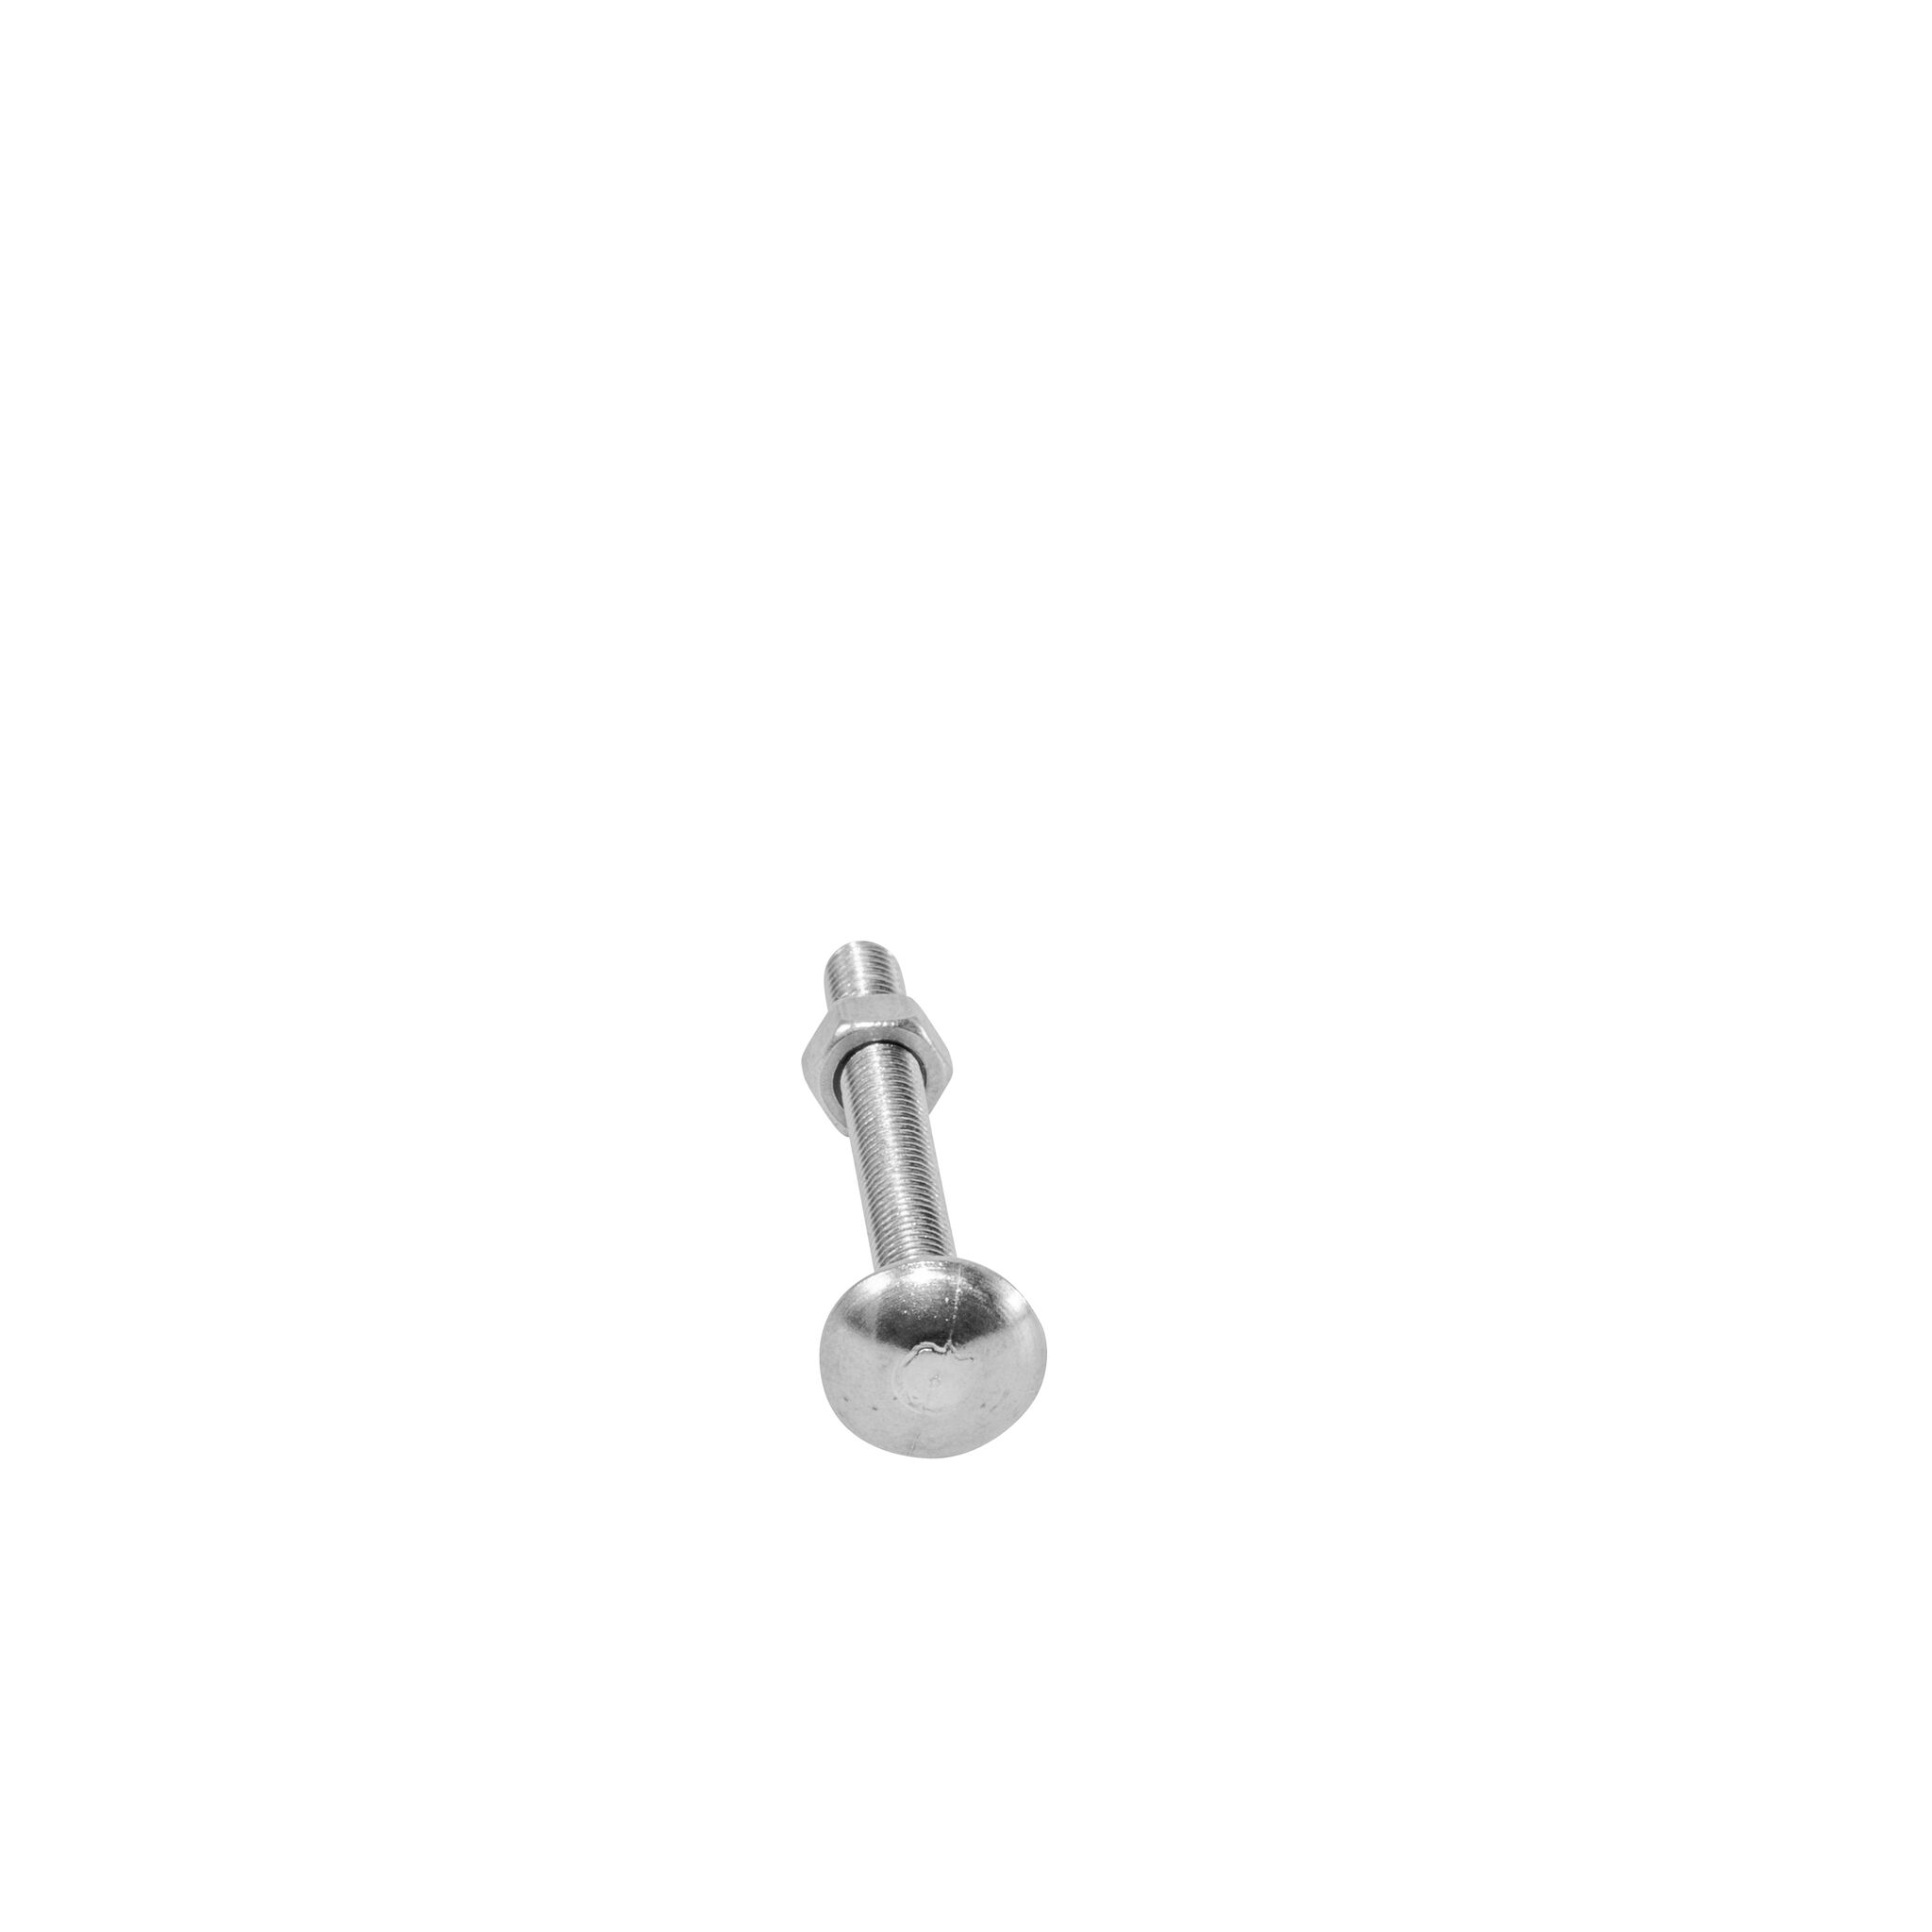 Carriage bolt with nut (DIN 603/934-A4)